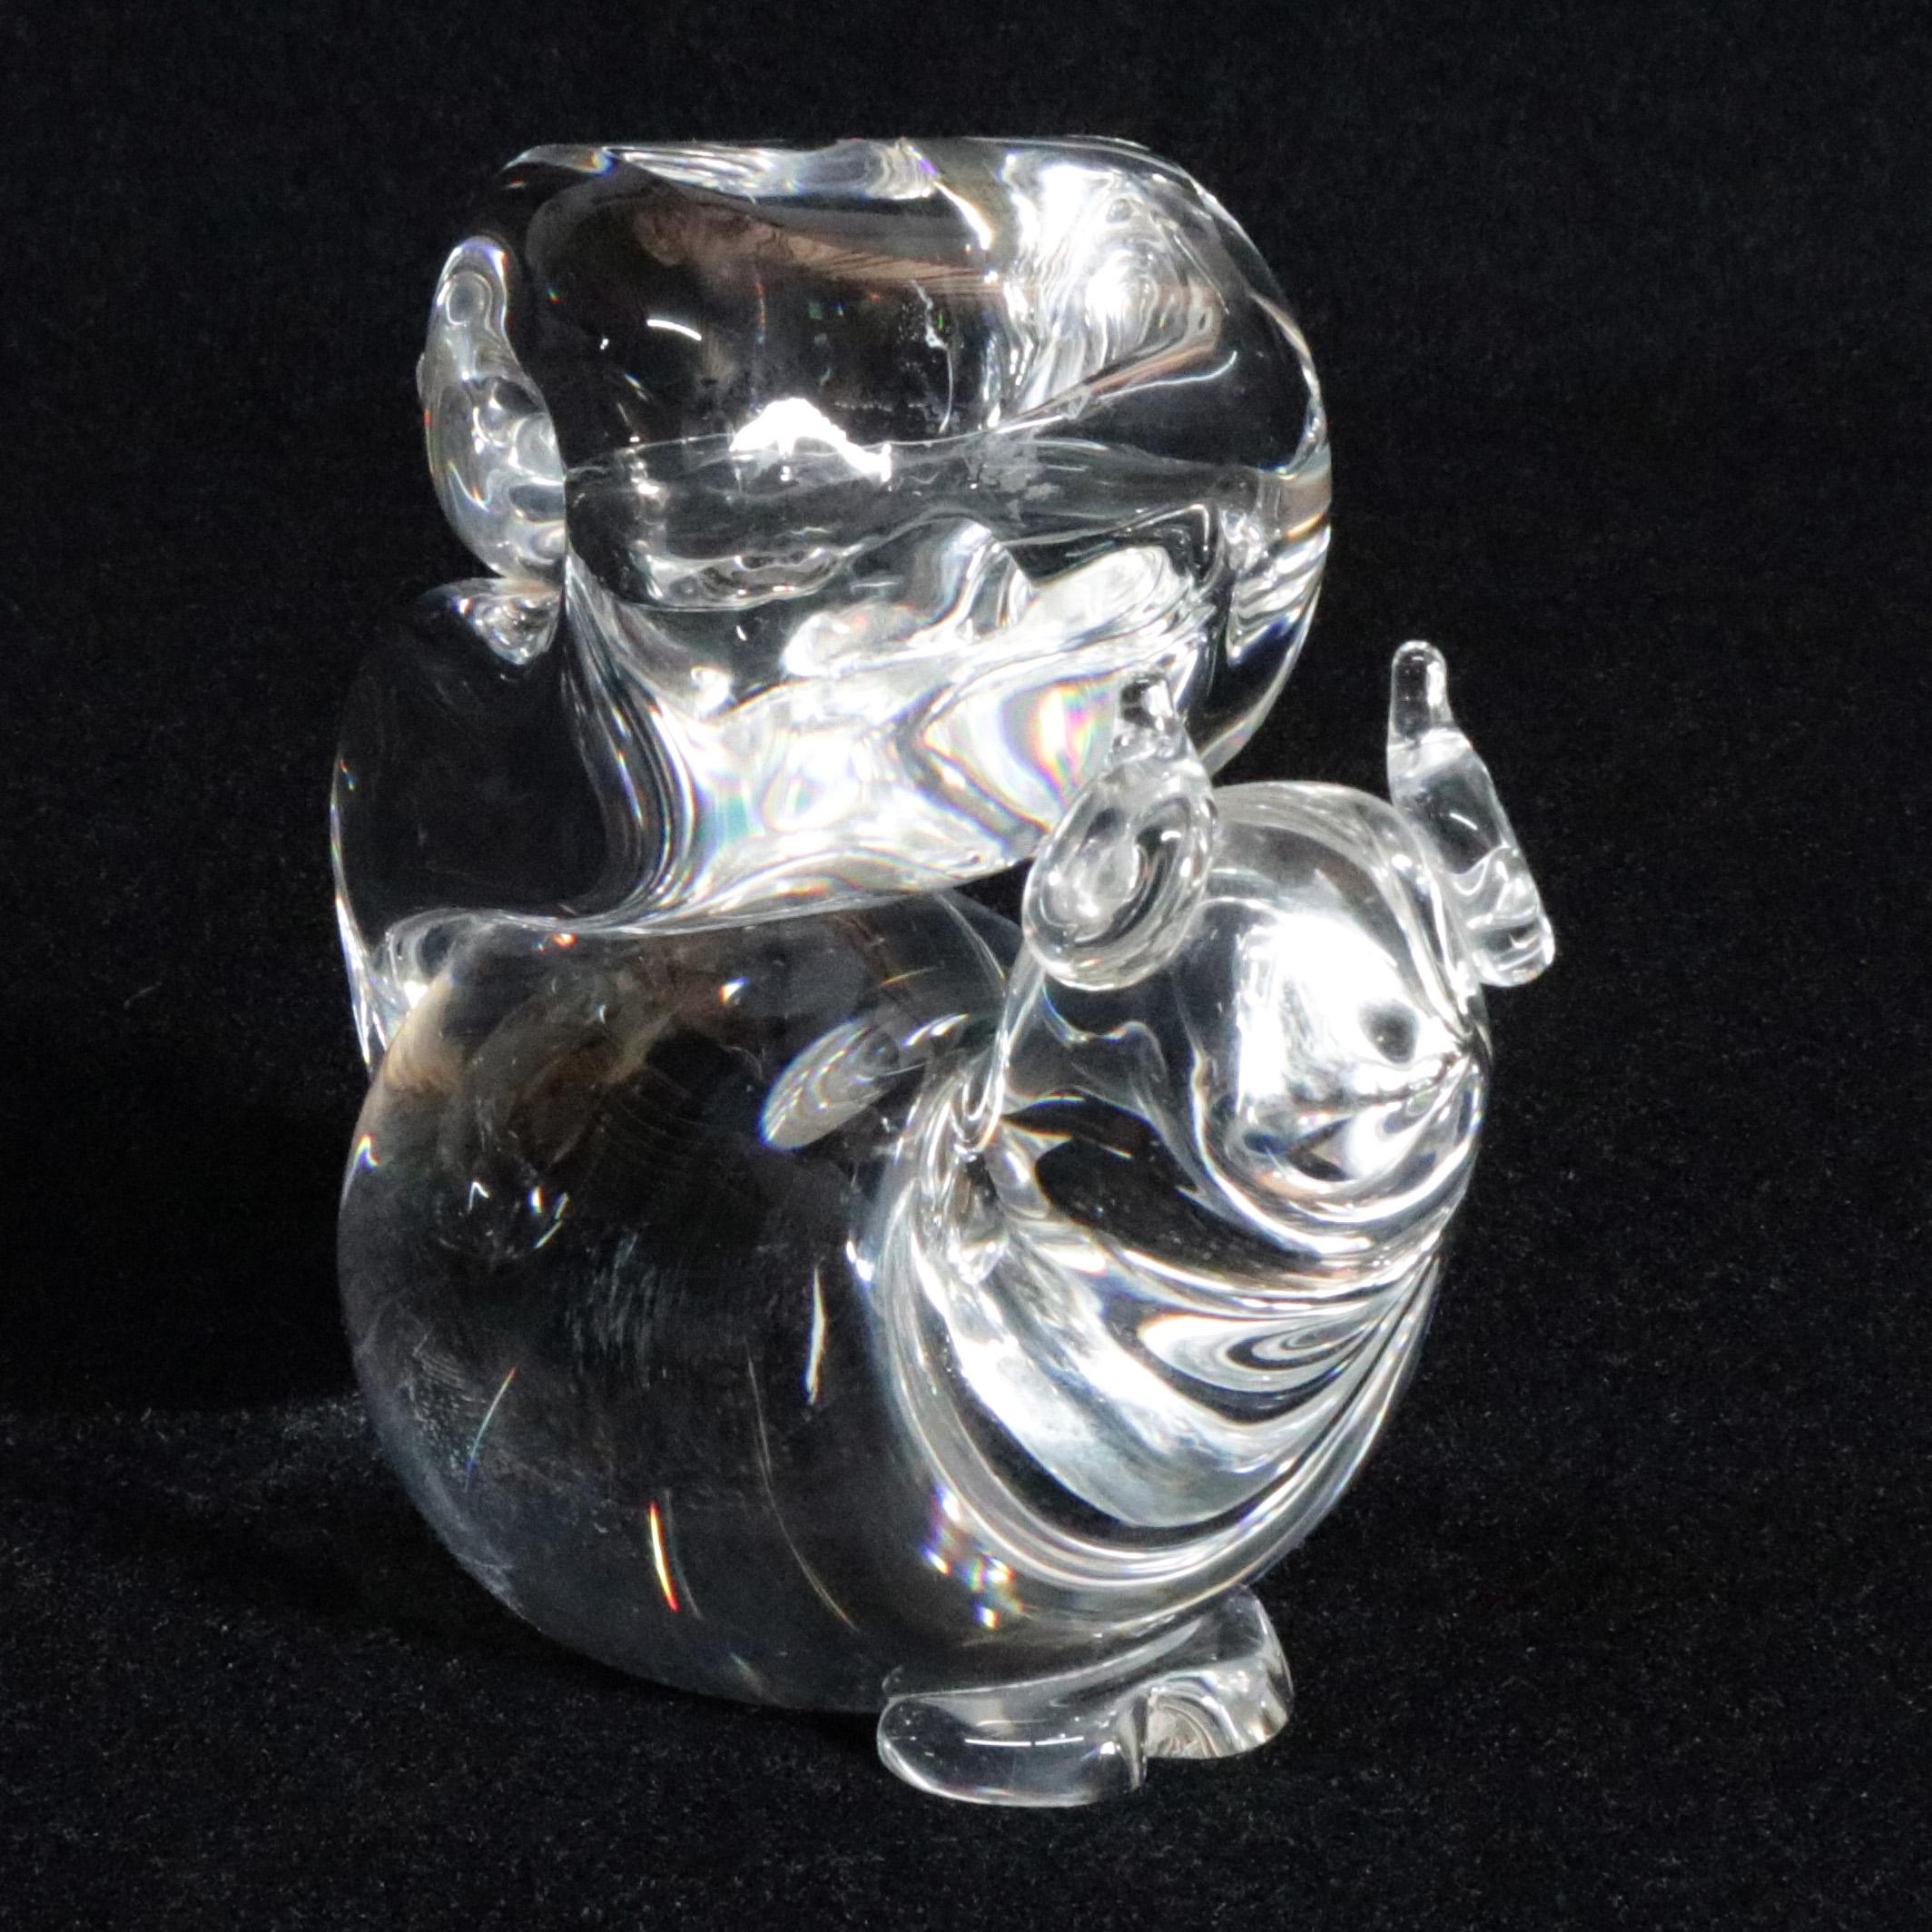 midcentury Steuben figurative mouth blown crystal sculptural paperweight feature colorless art glass in full body form of Seated Squirrel designed by Lloyd Atkins 1963 for Corning Museum of Glass, New York, NY, signed on base, 20th century
Large